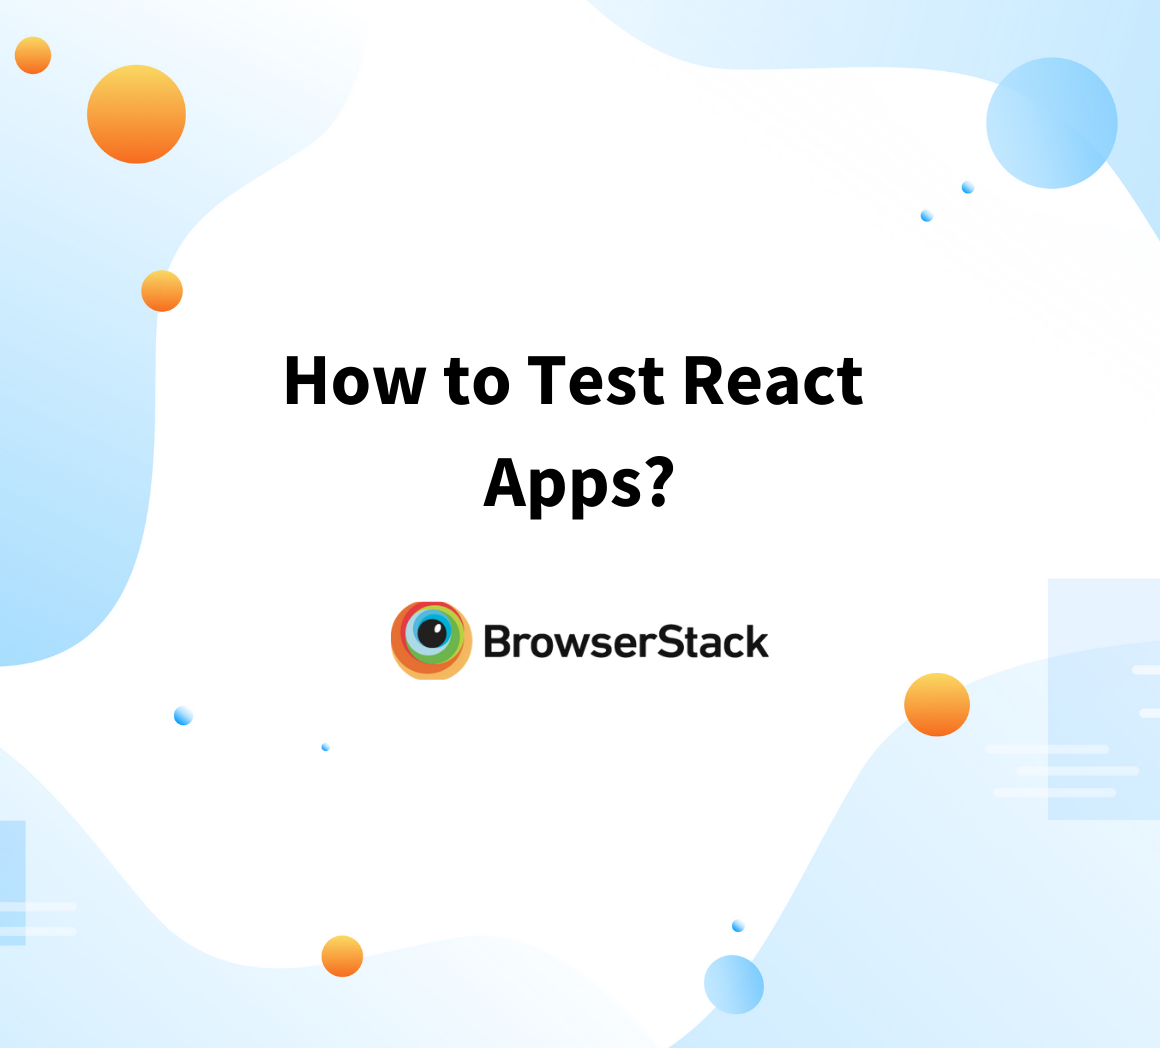 How to Test React Apps